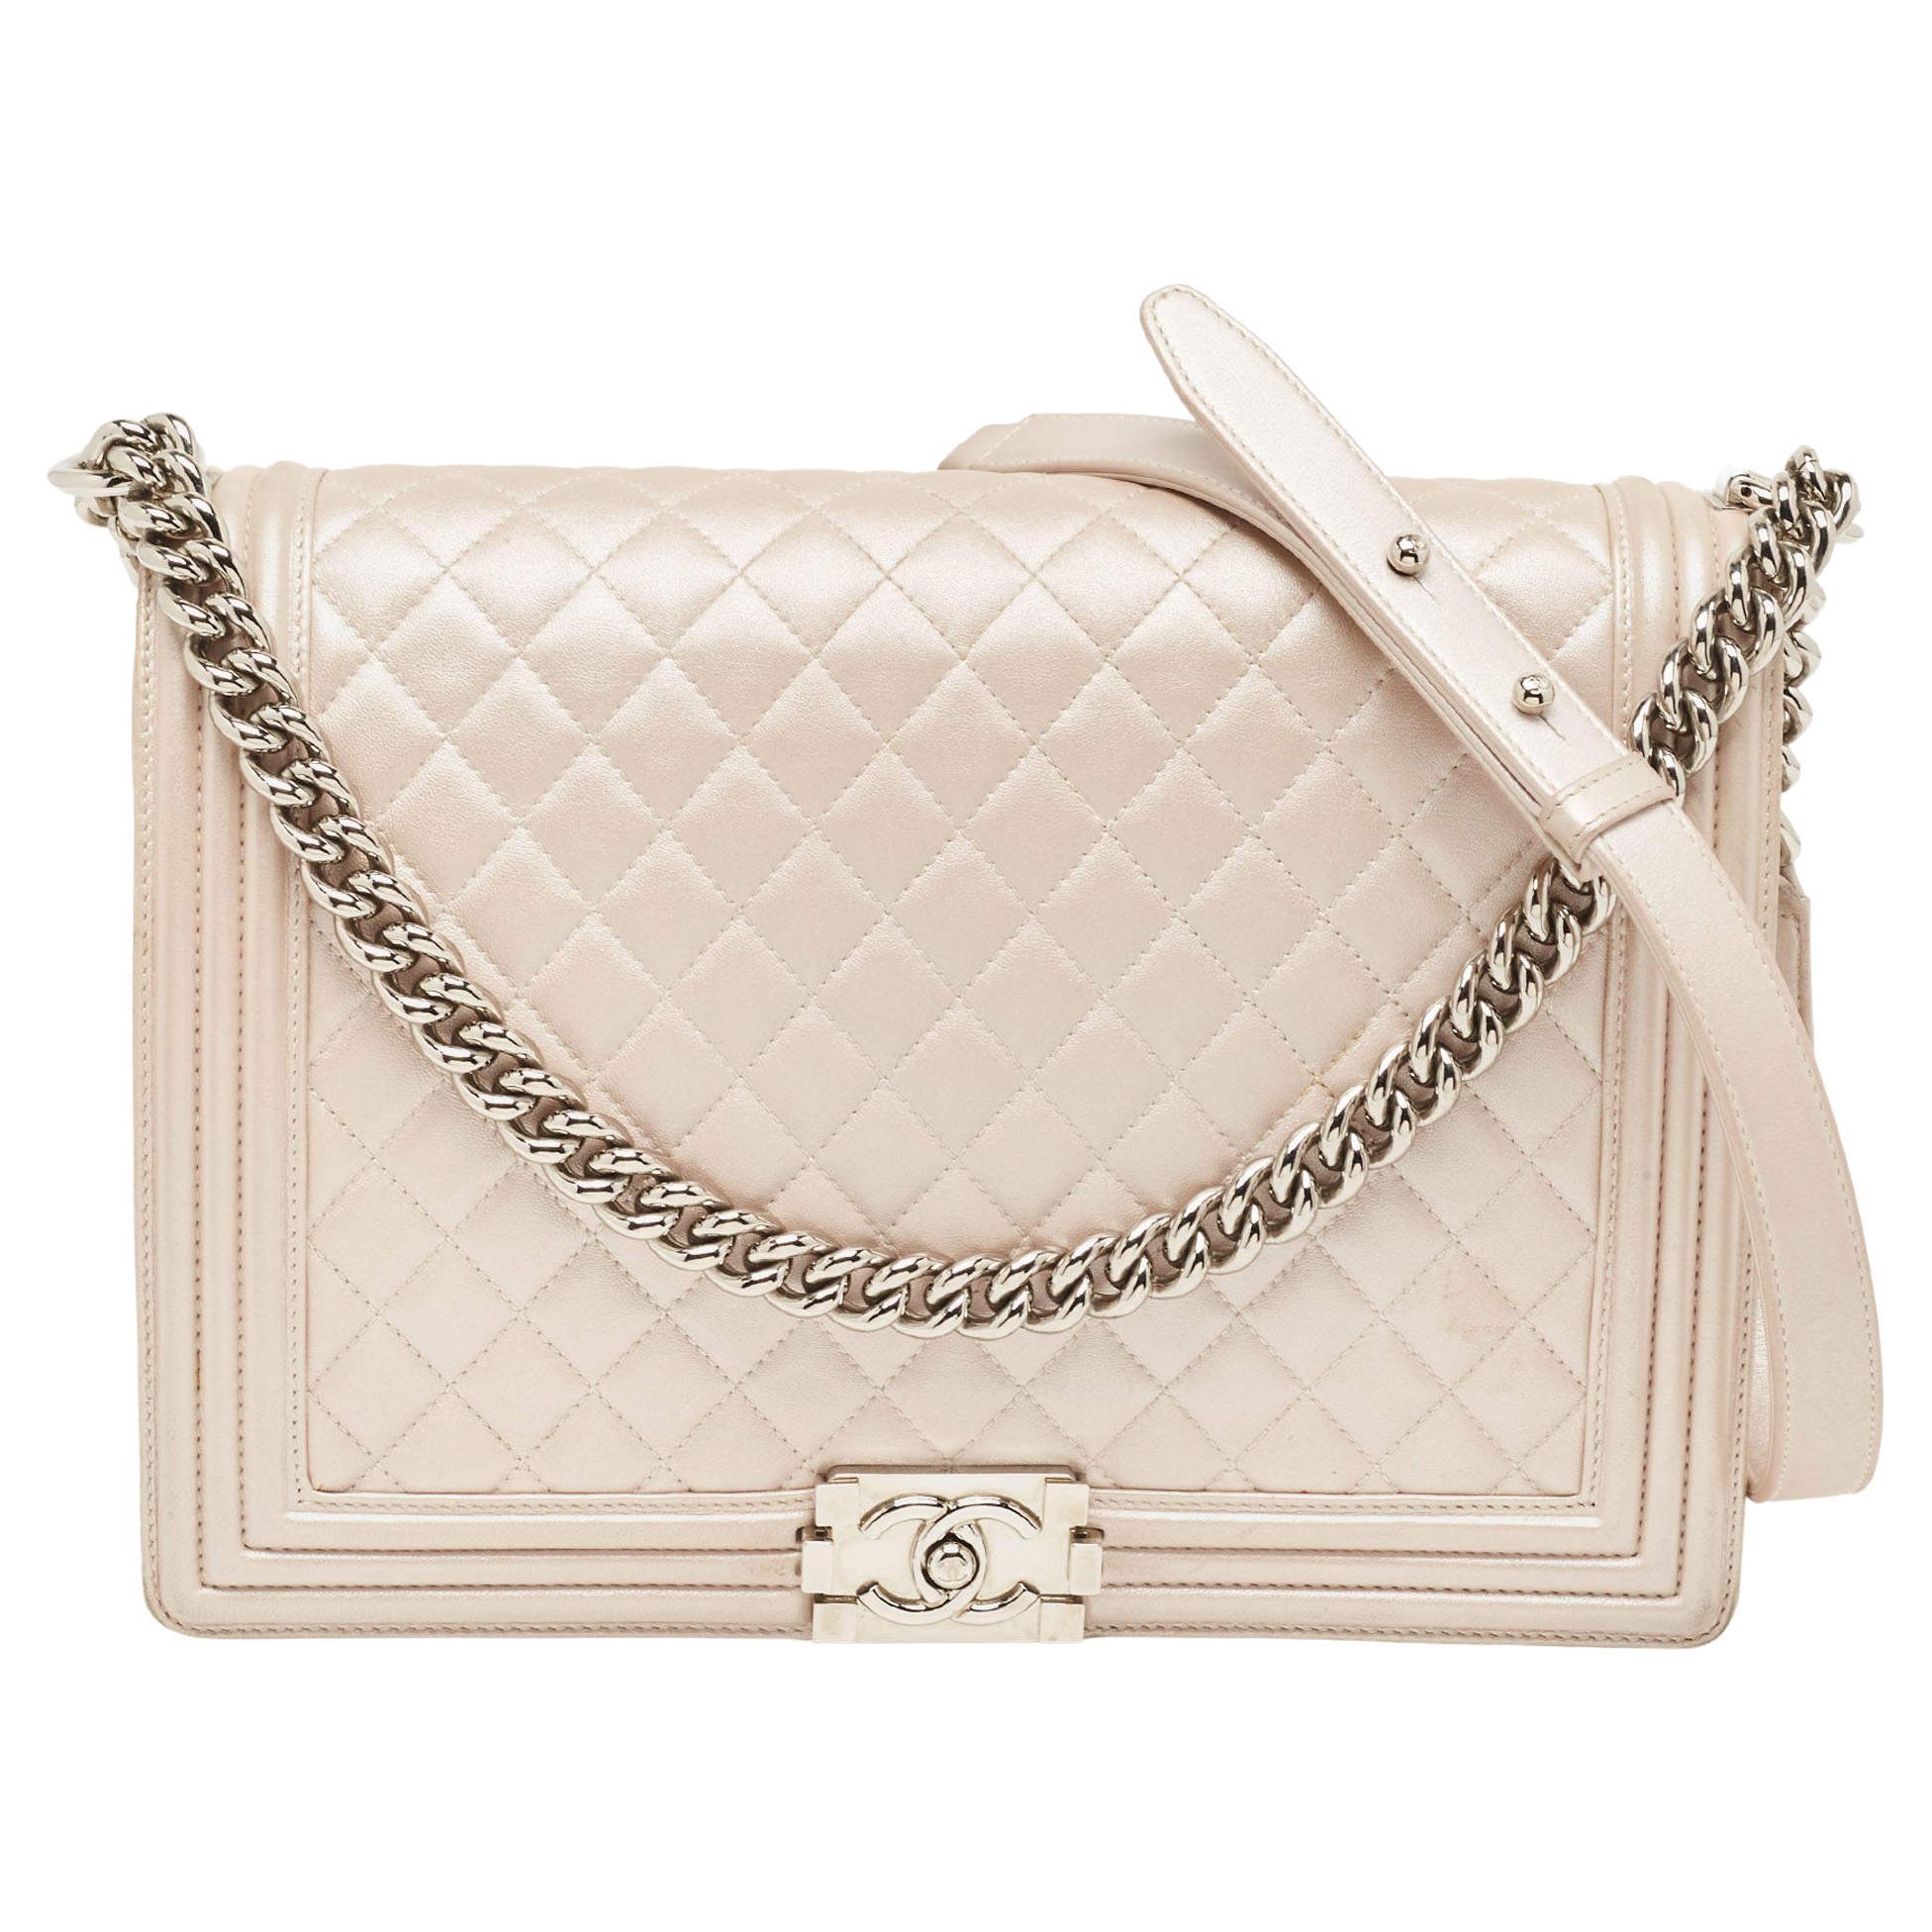 Chanel Pearl White Shimmer Quilted Leather Large Boy Flap Bag For Sale